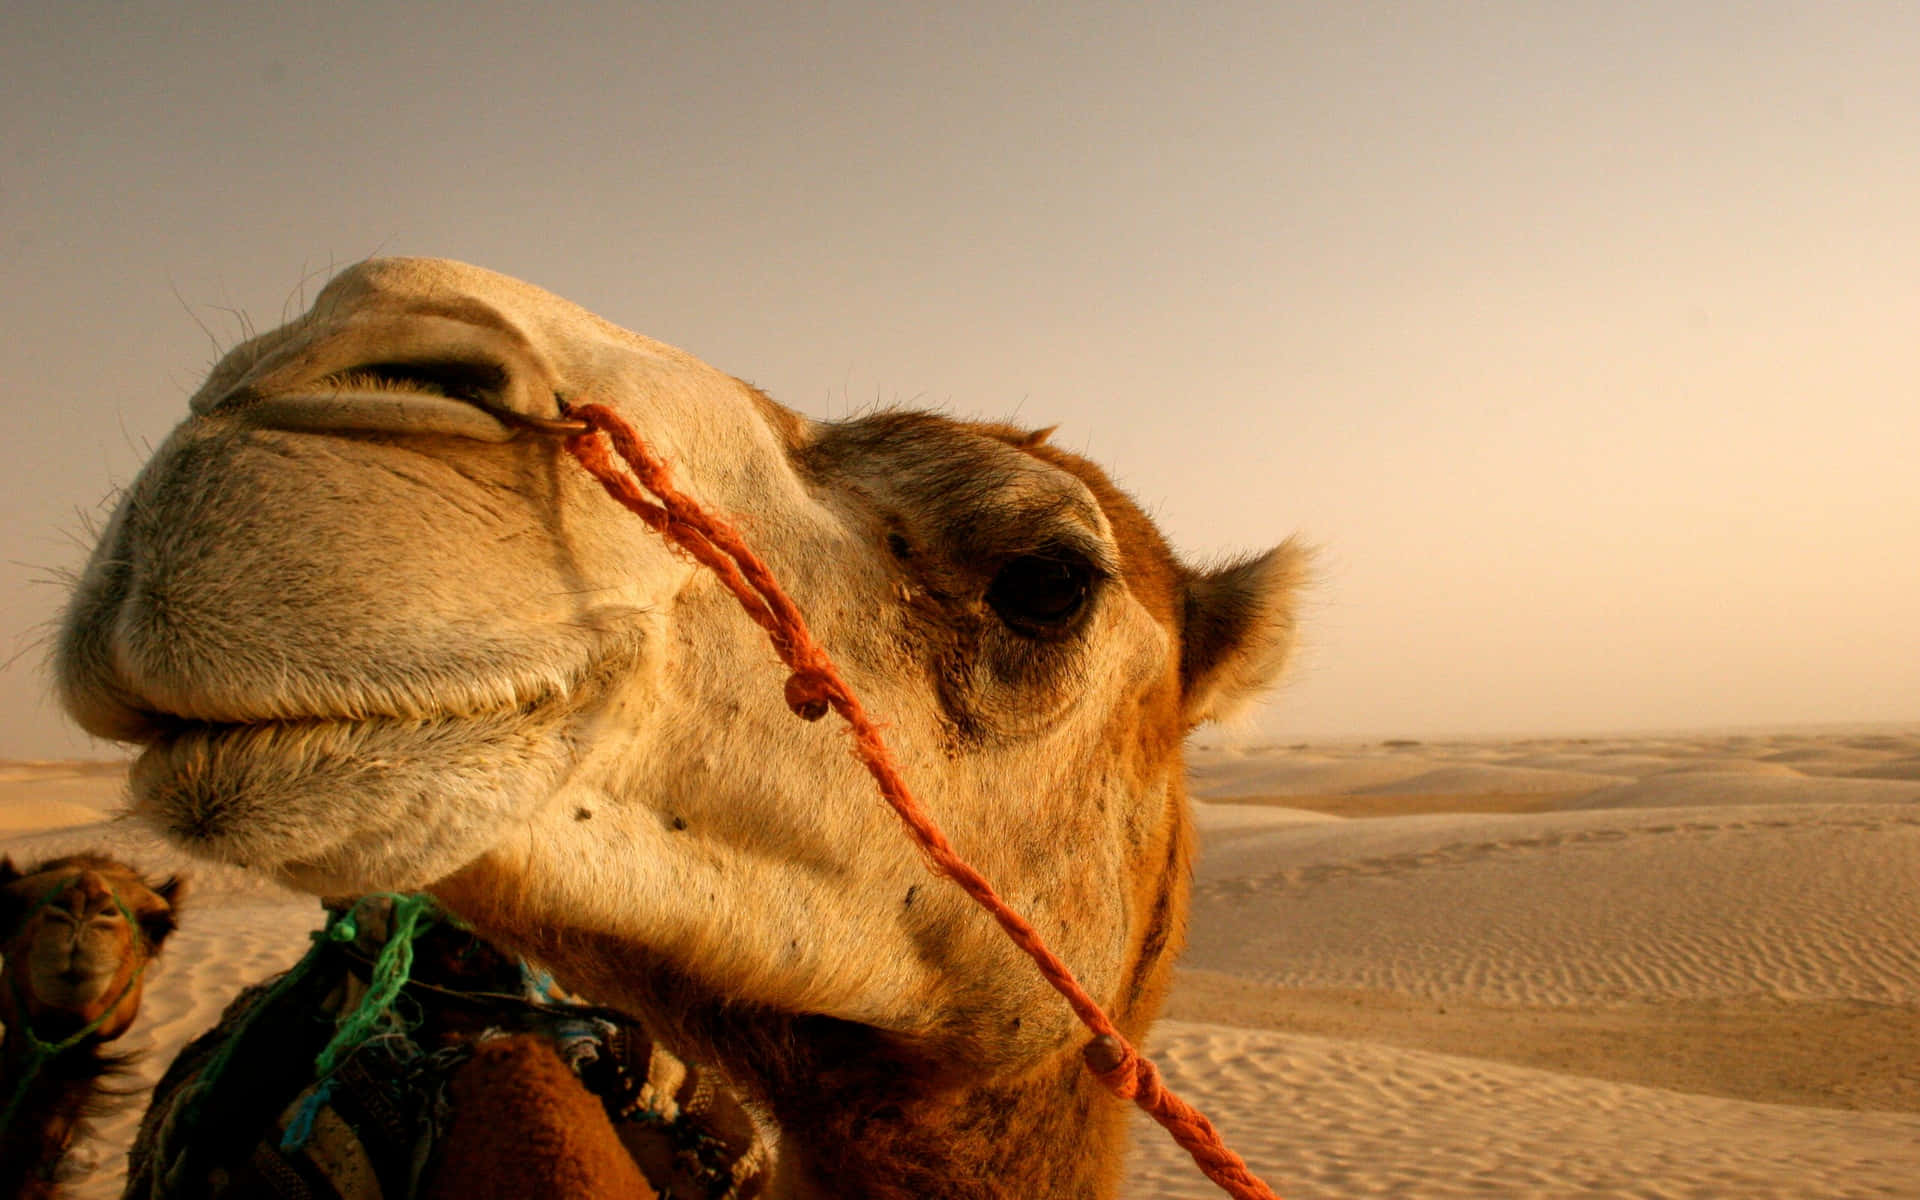 An adorable camel posing in the middle of the desert